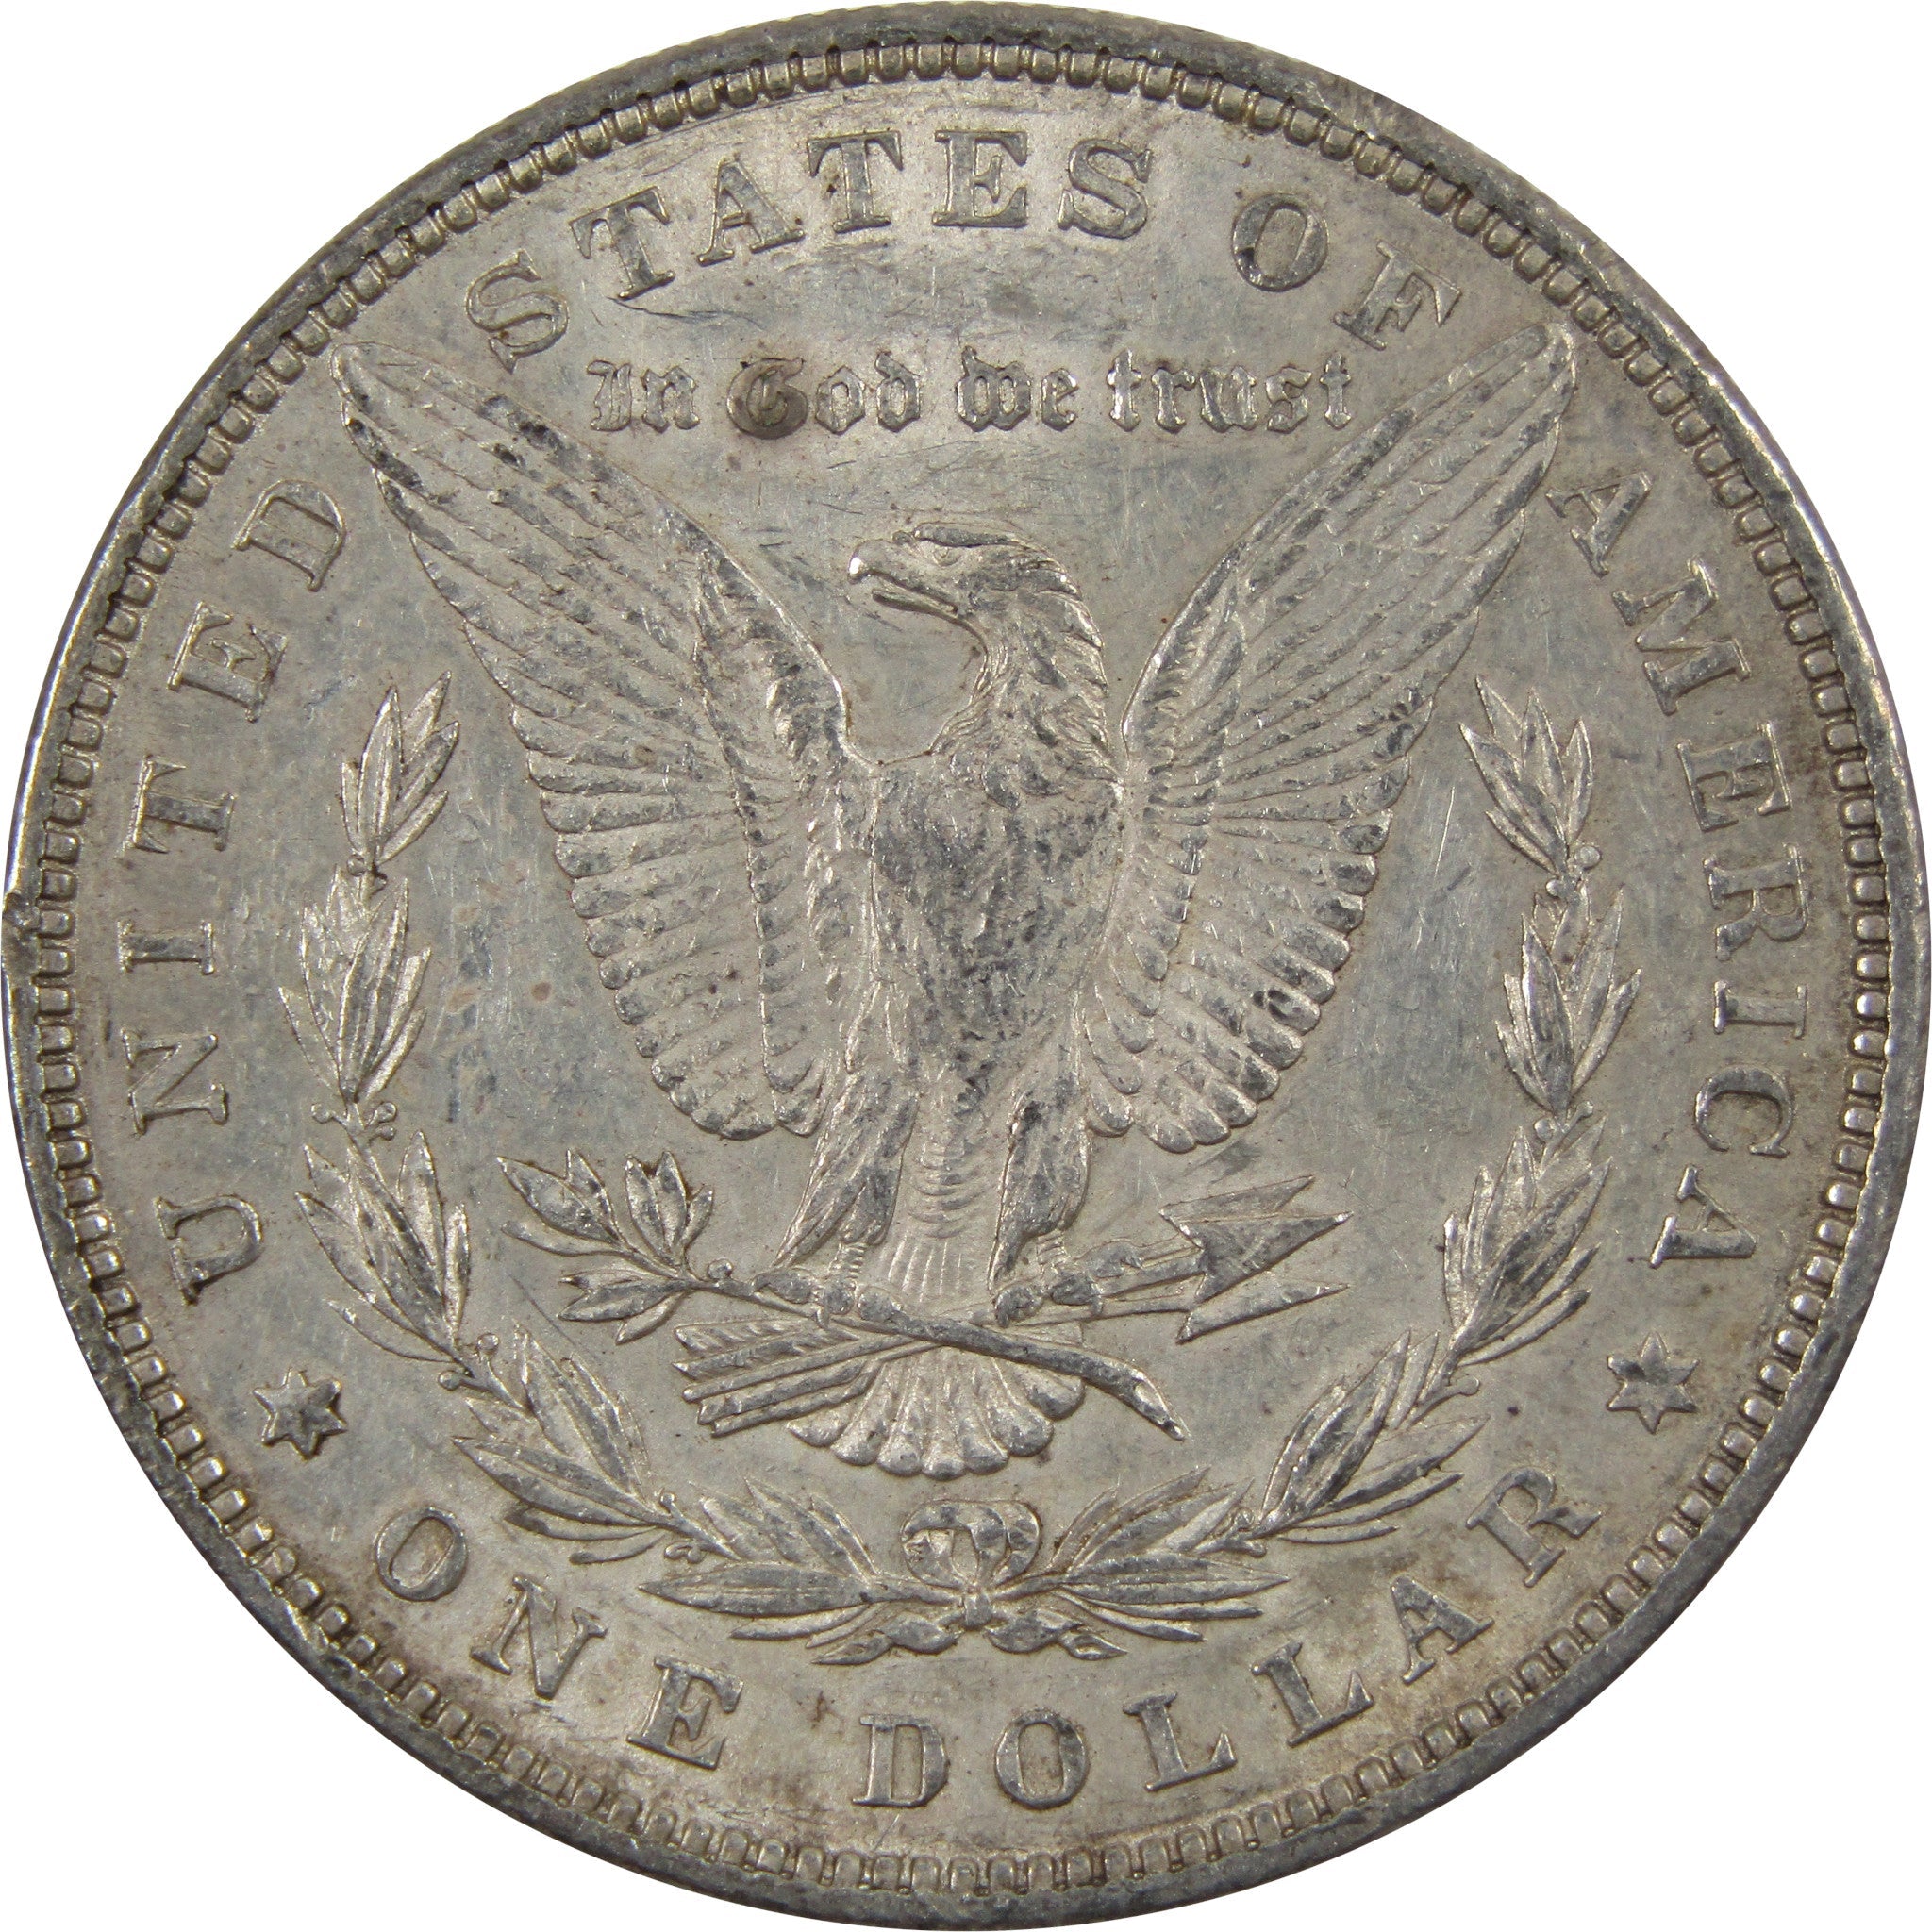 1881 Morgan Dollar AU About Uncirculated 90% Silver $1 Coin SKU:I5458 - Morgan coin - Morgan silver dollar - Morgan silver dollar for sale - Profile Coins &amp; Collectibles